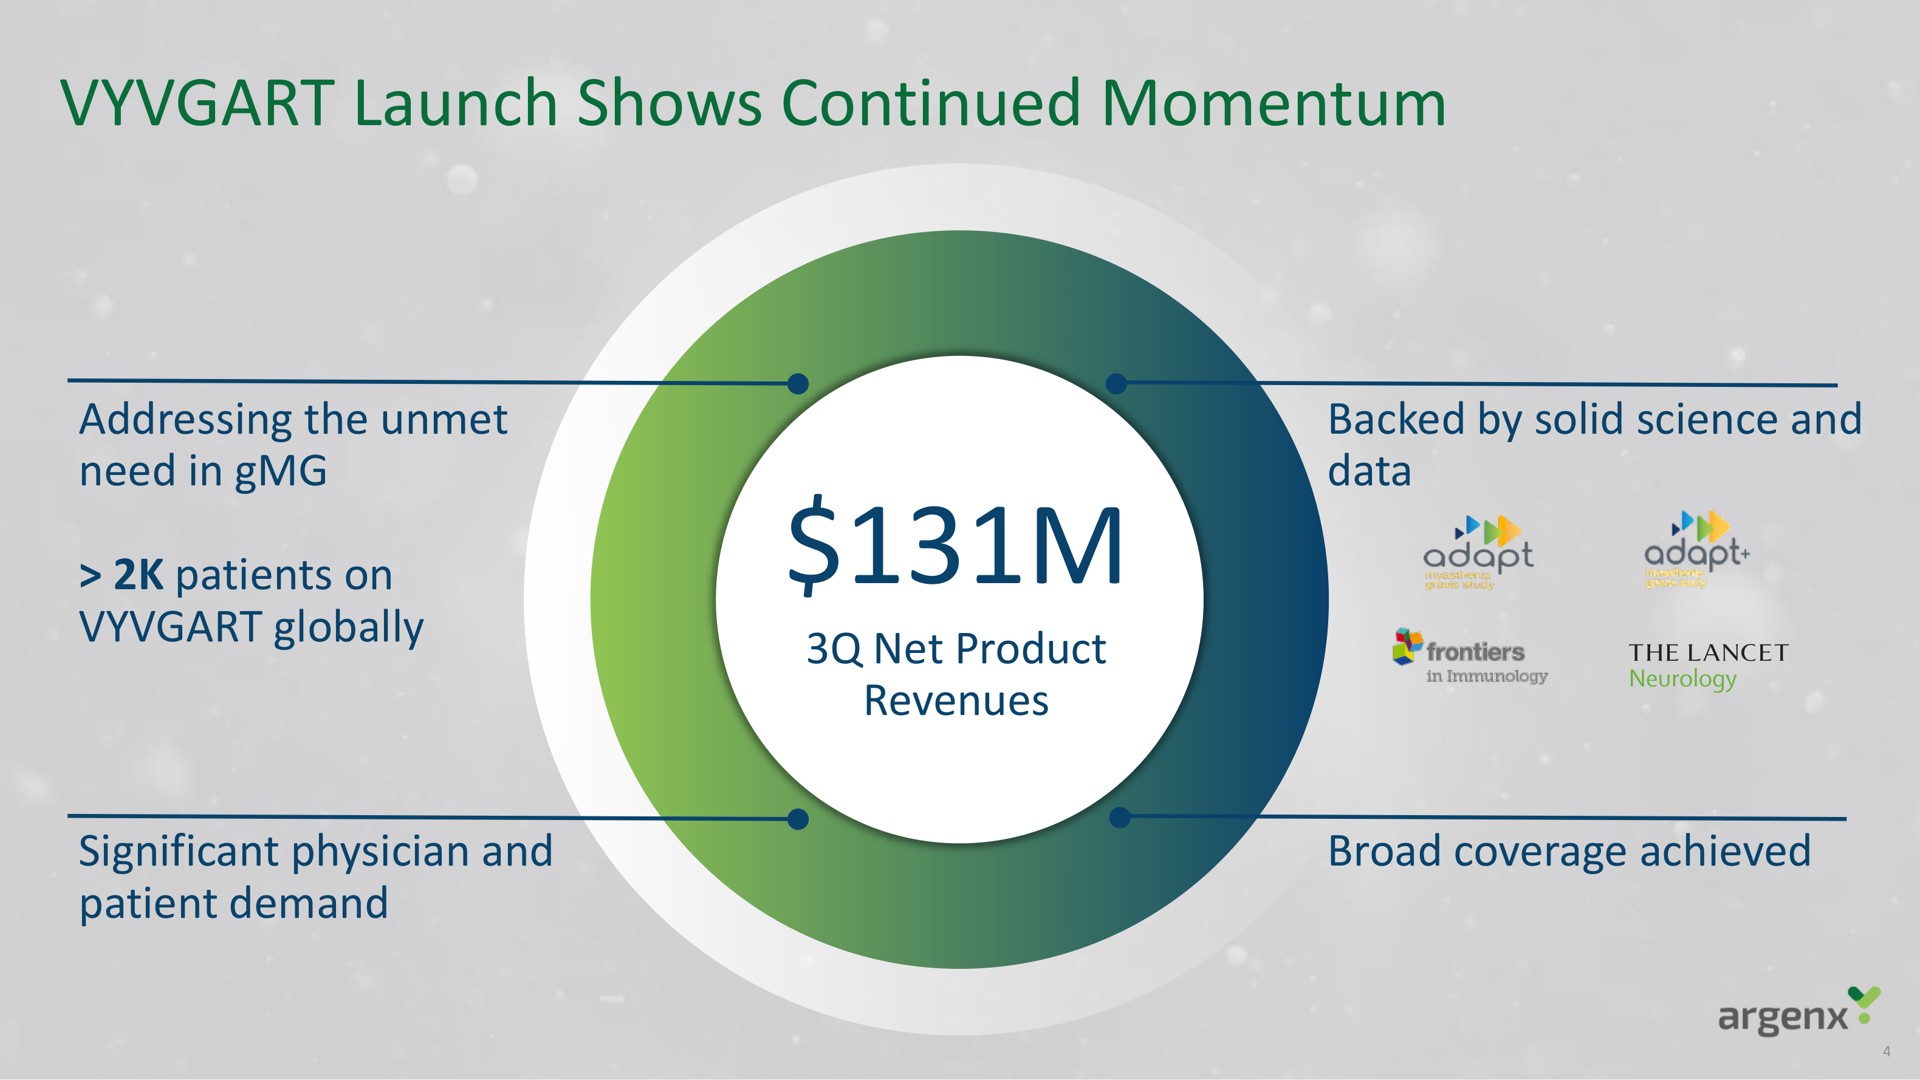 launch shows continued momentum | argenx SE